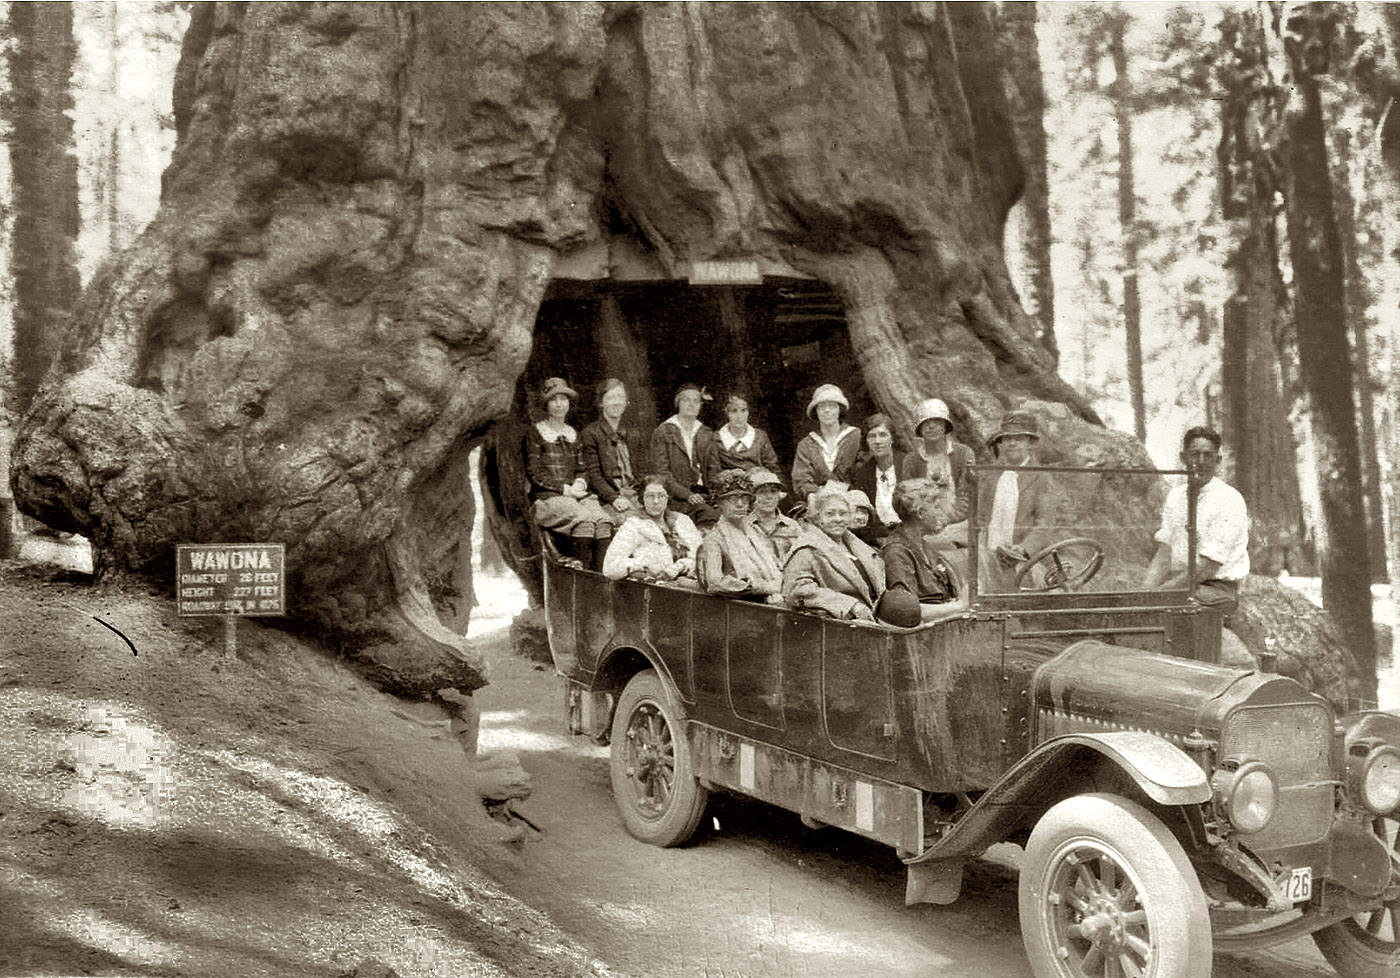 Wawona Tree was a famous giant sequoia that stood in Mariposa Grove, Yosemite National Park. It had a height of 227 feet (69 m) and was 90 ft (27 m) in circumference. A tunnel was cut through the tree in 1881. (Sign says road was cut 1875.) The Wawona Tree fell in 1969 under an estimated two ton load of snow on its crown. The giant sequoia is estimated to have been 2,300 years old.